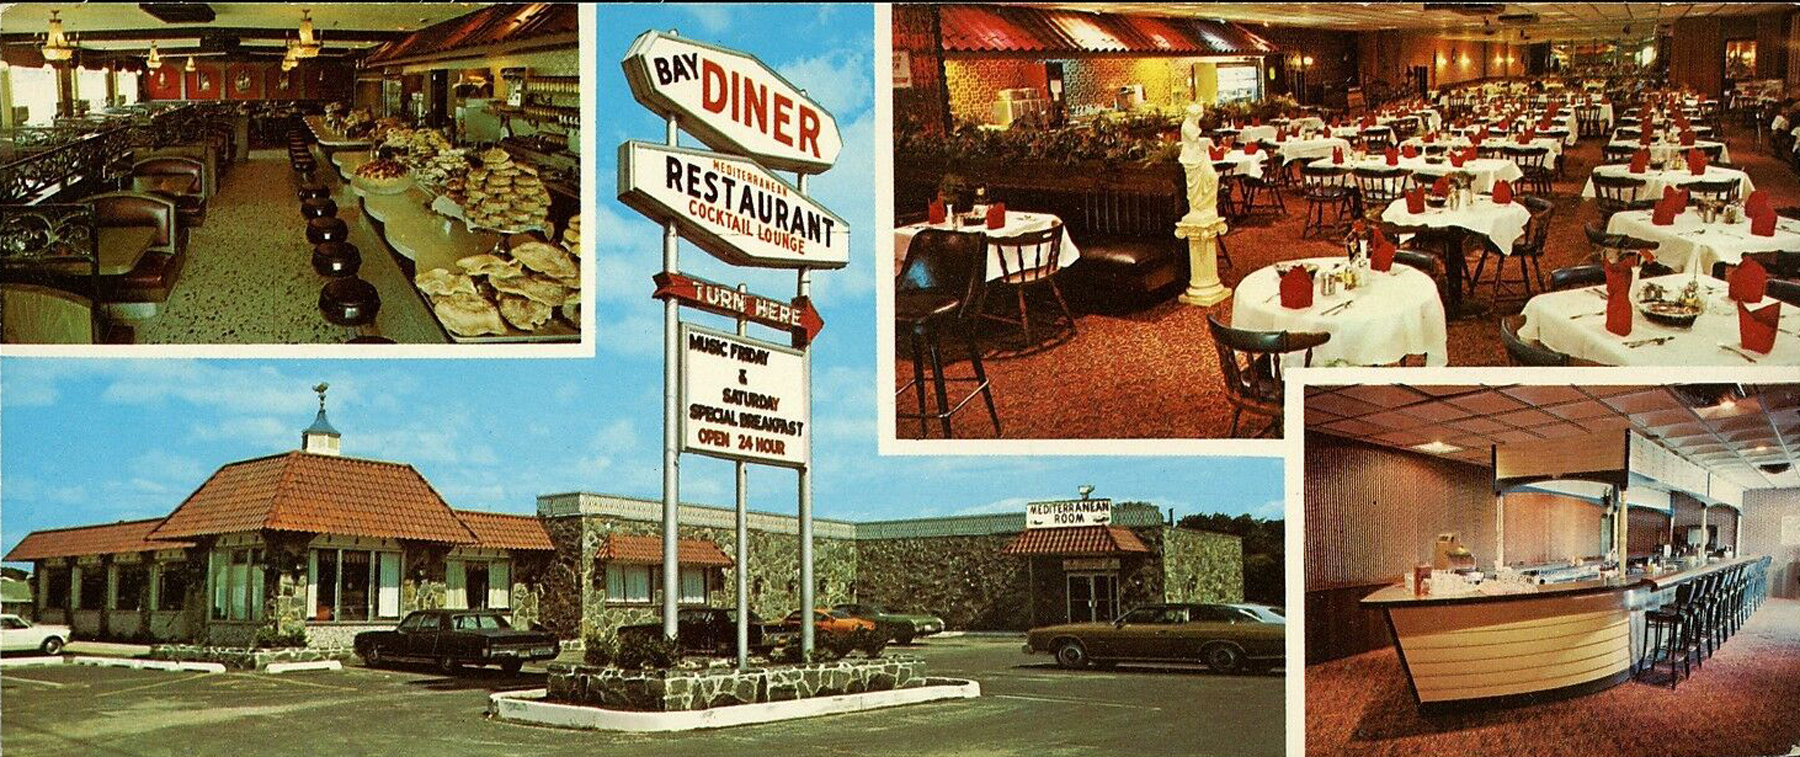 Somers Point - Bay Diner Restaurant - Exterior and Interior